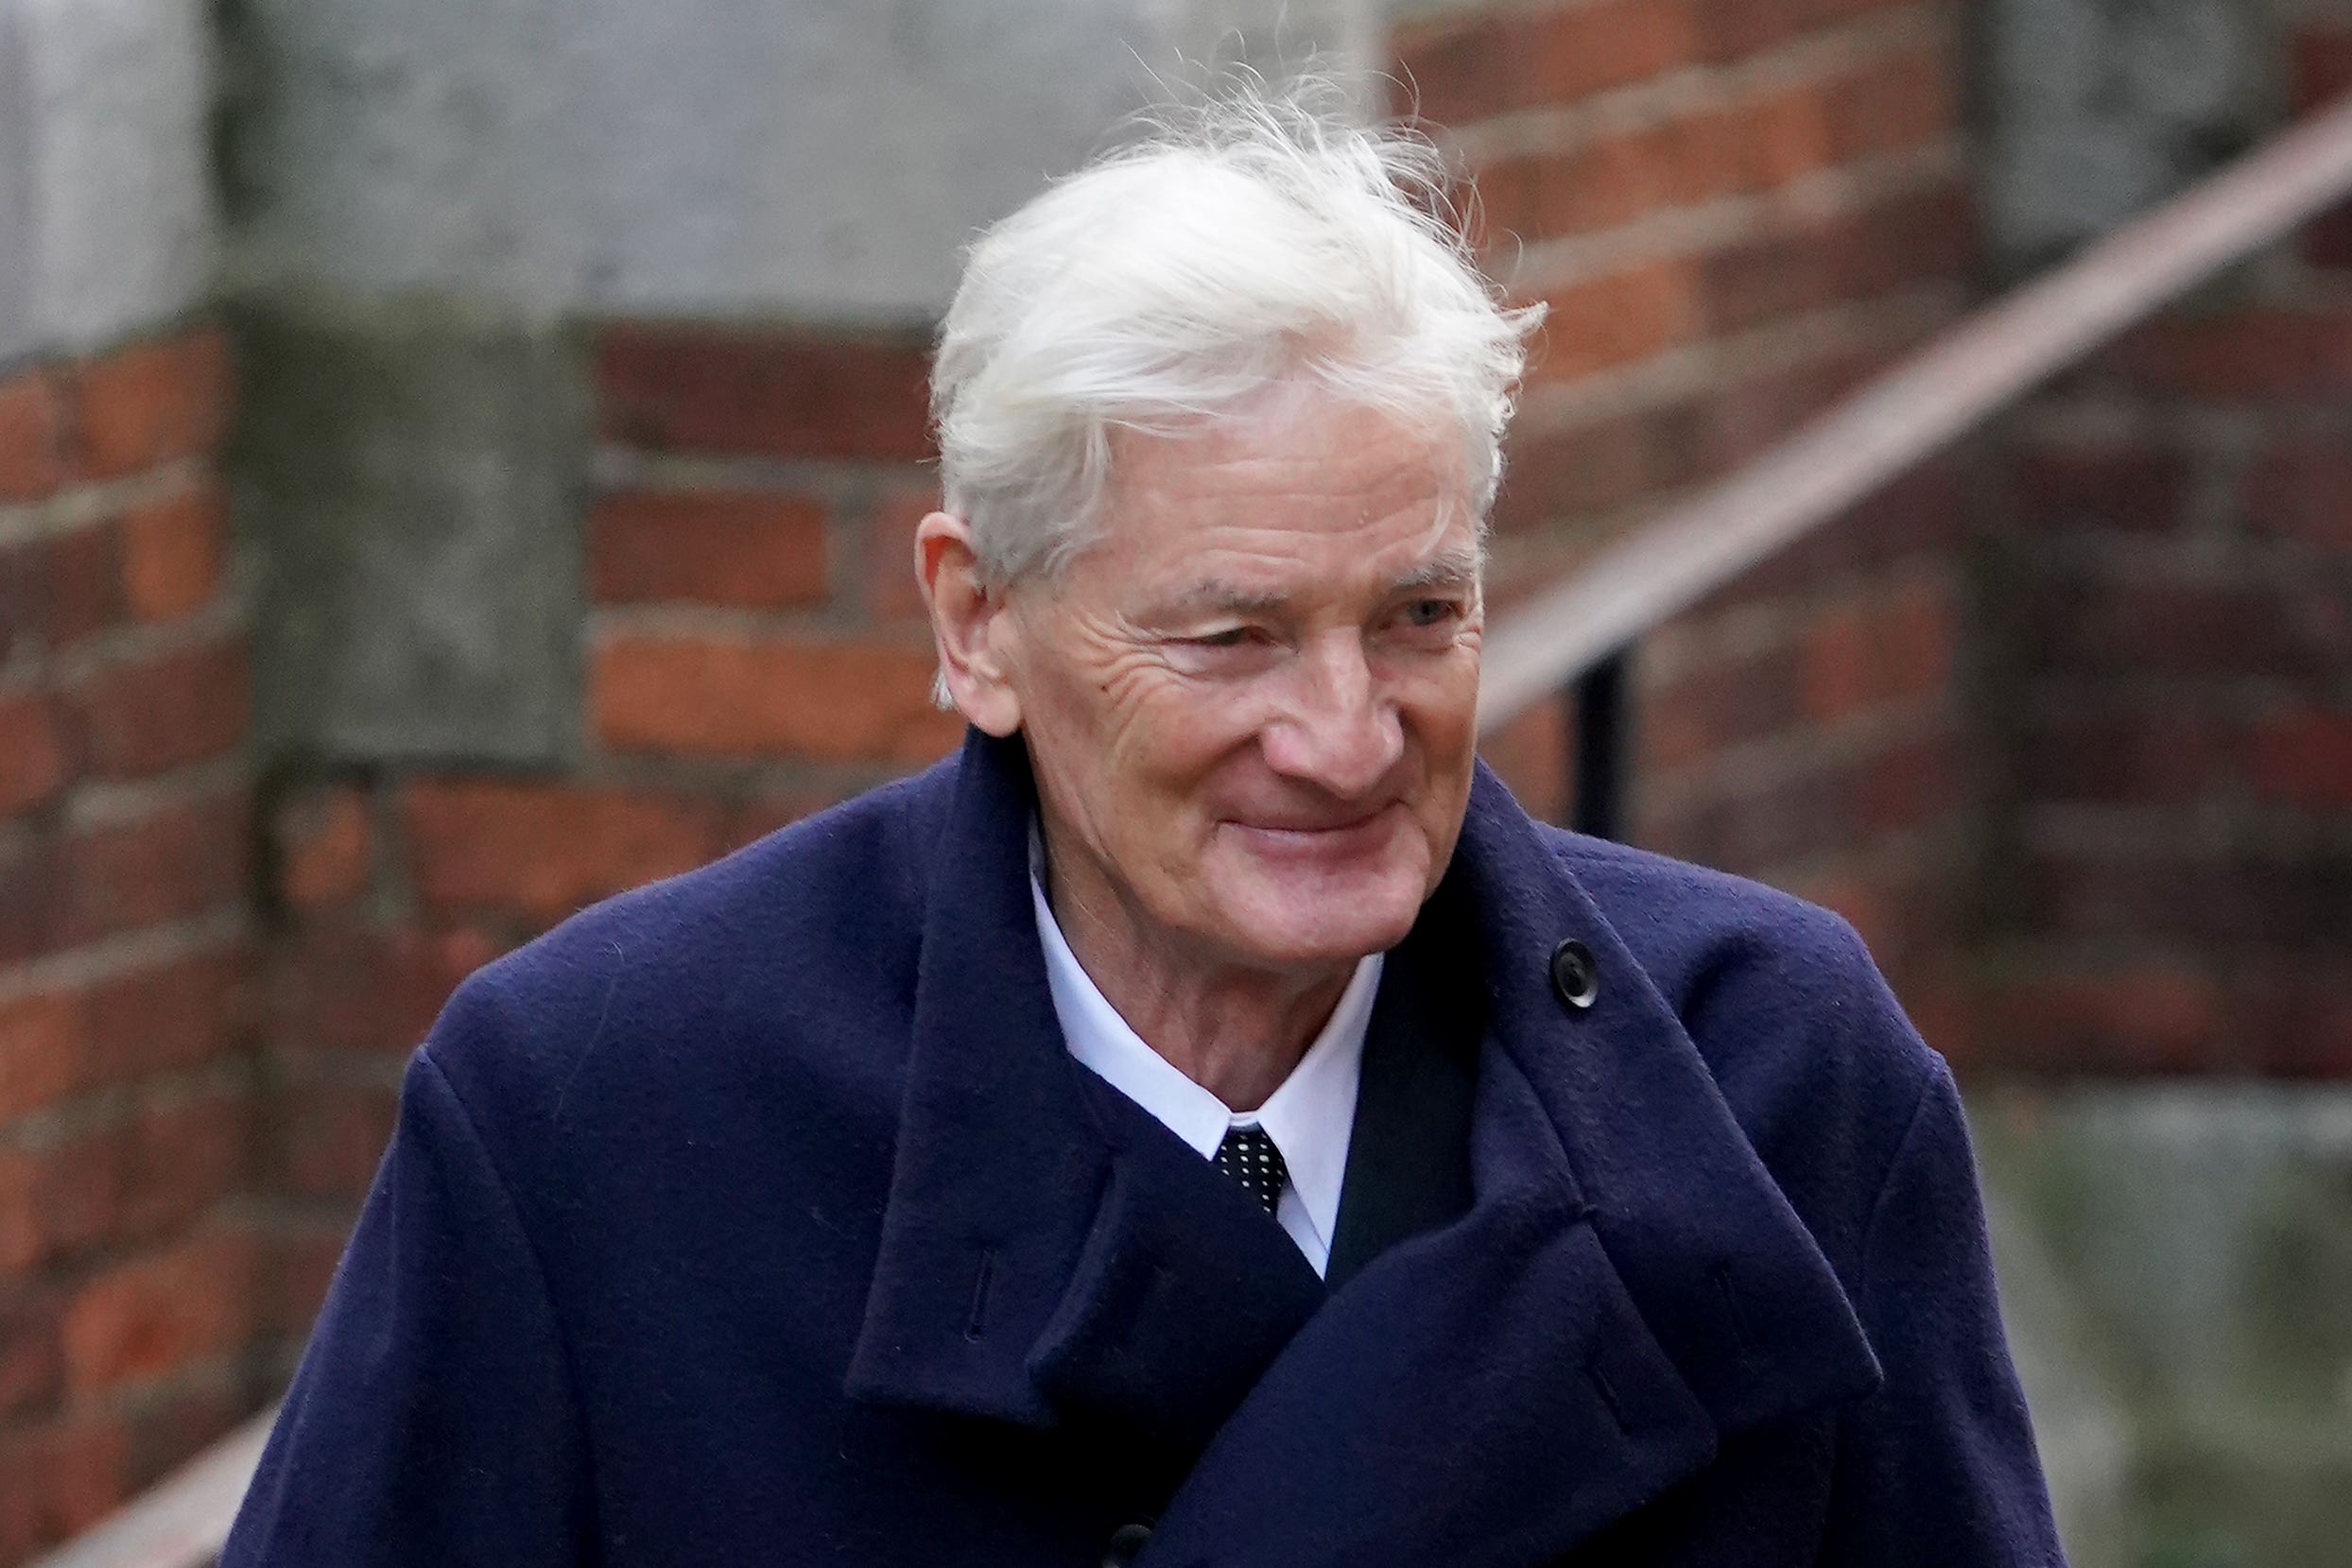 Sir James Dyson arriving at the Royal Courts Of Justice (Gareth Fuller/PA)